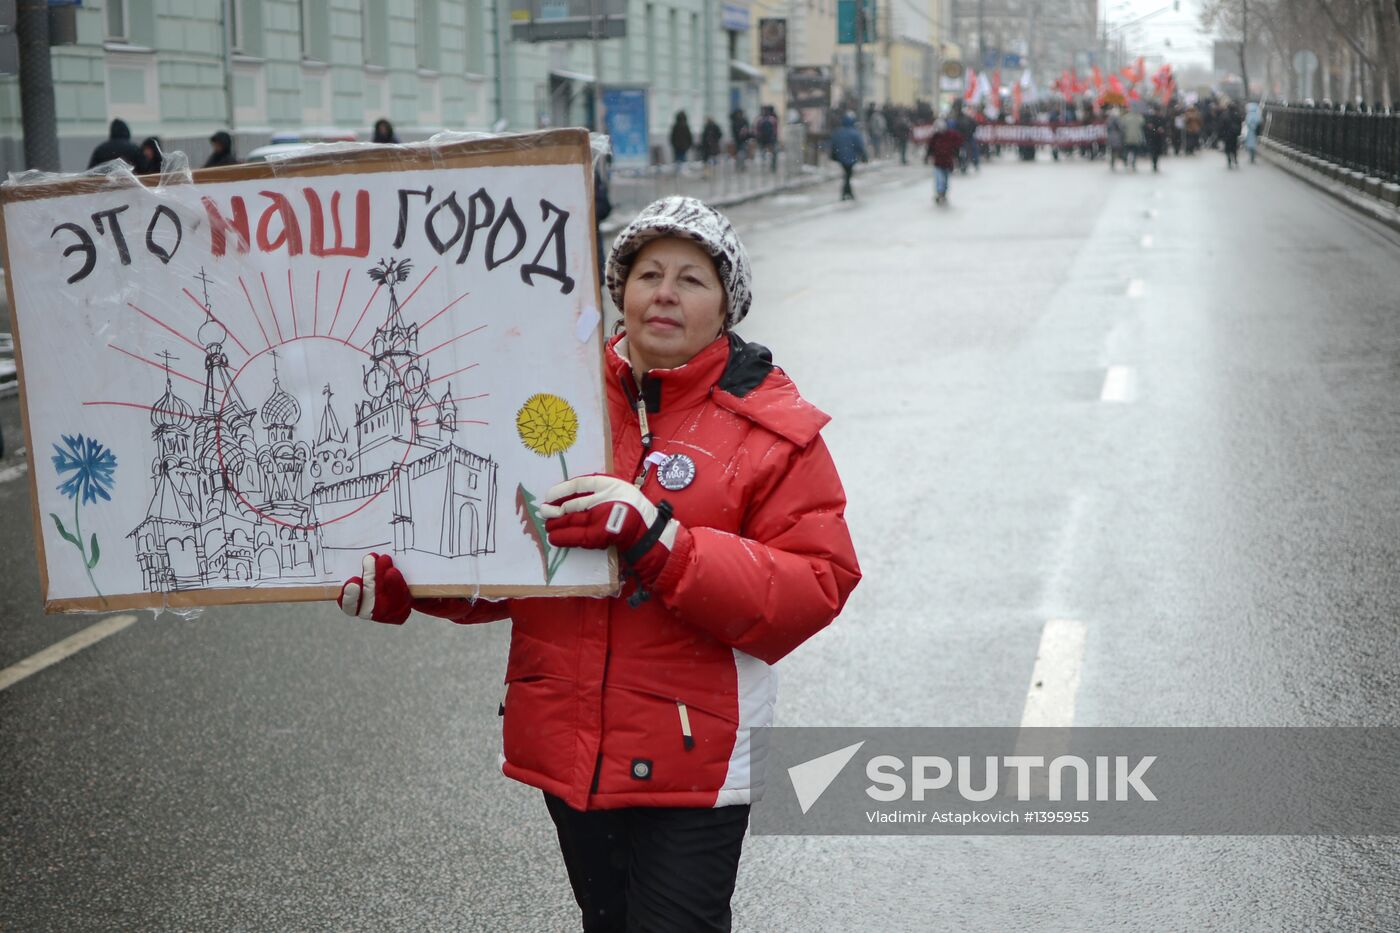 March for the rights of Muscovites